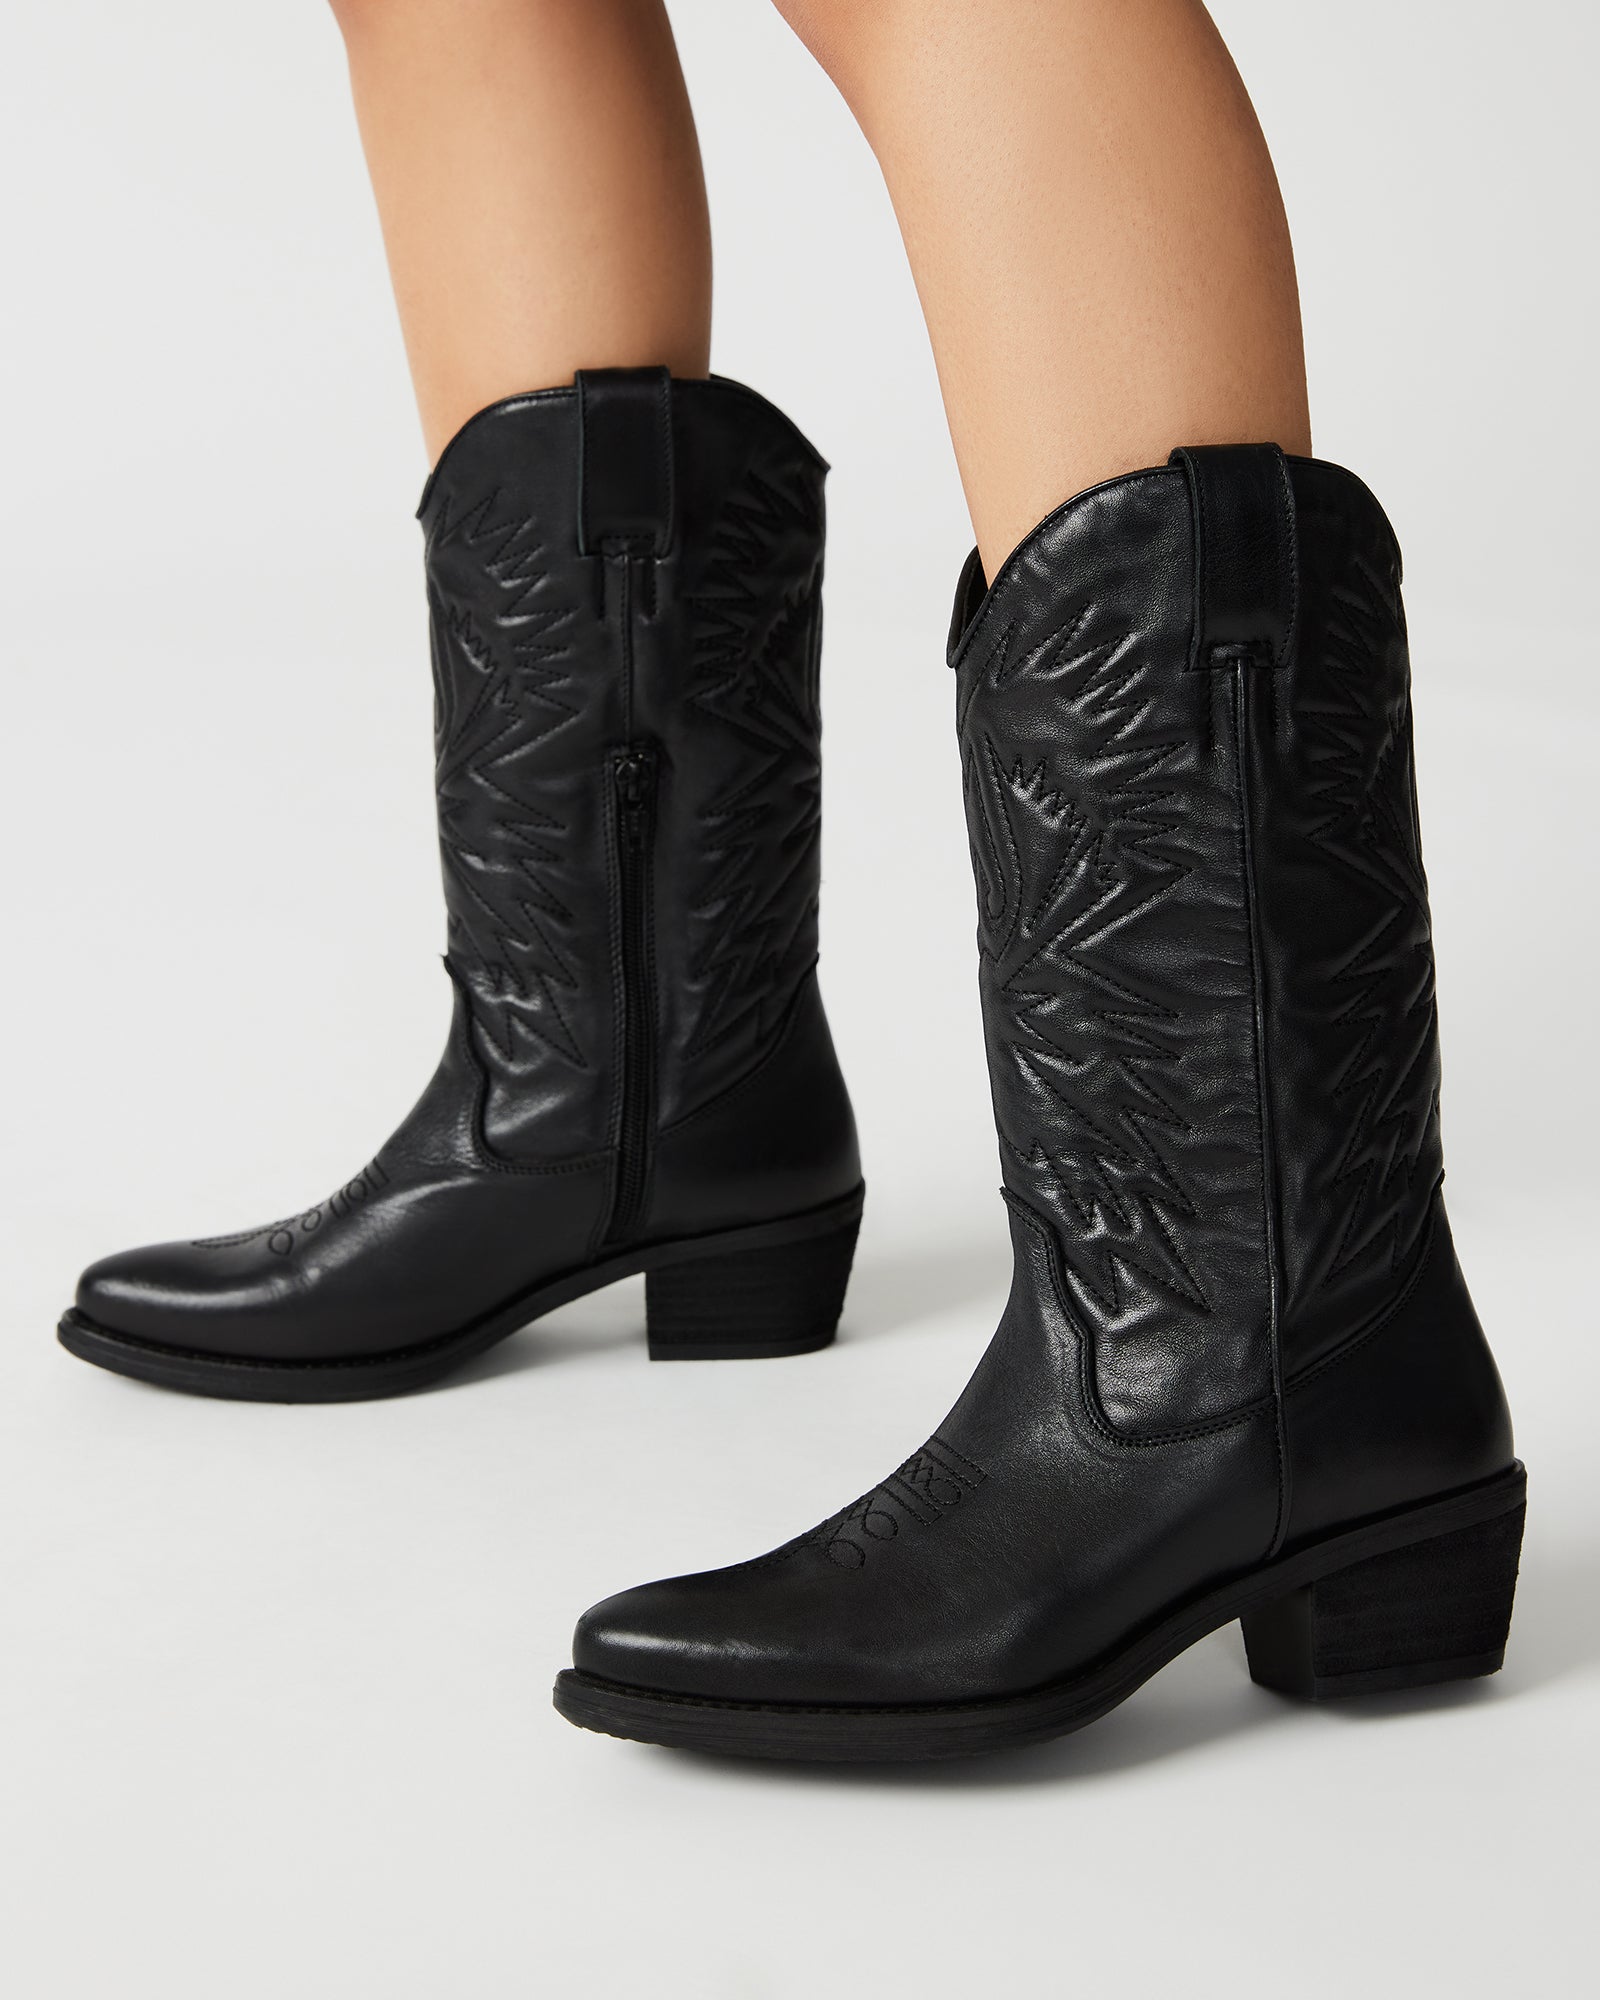 HAYWARD Black Leather Western Boots | Women's Leather Cowboy Boots ...